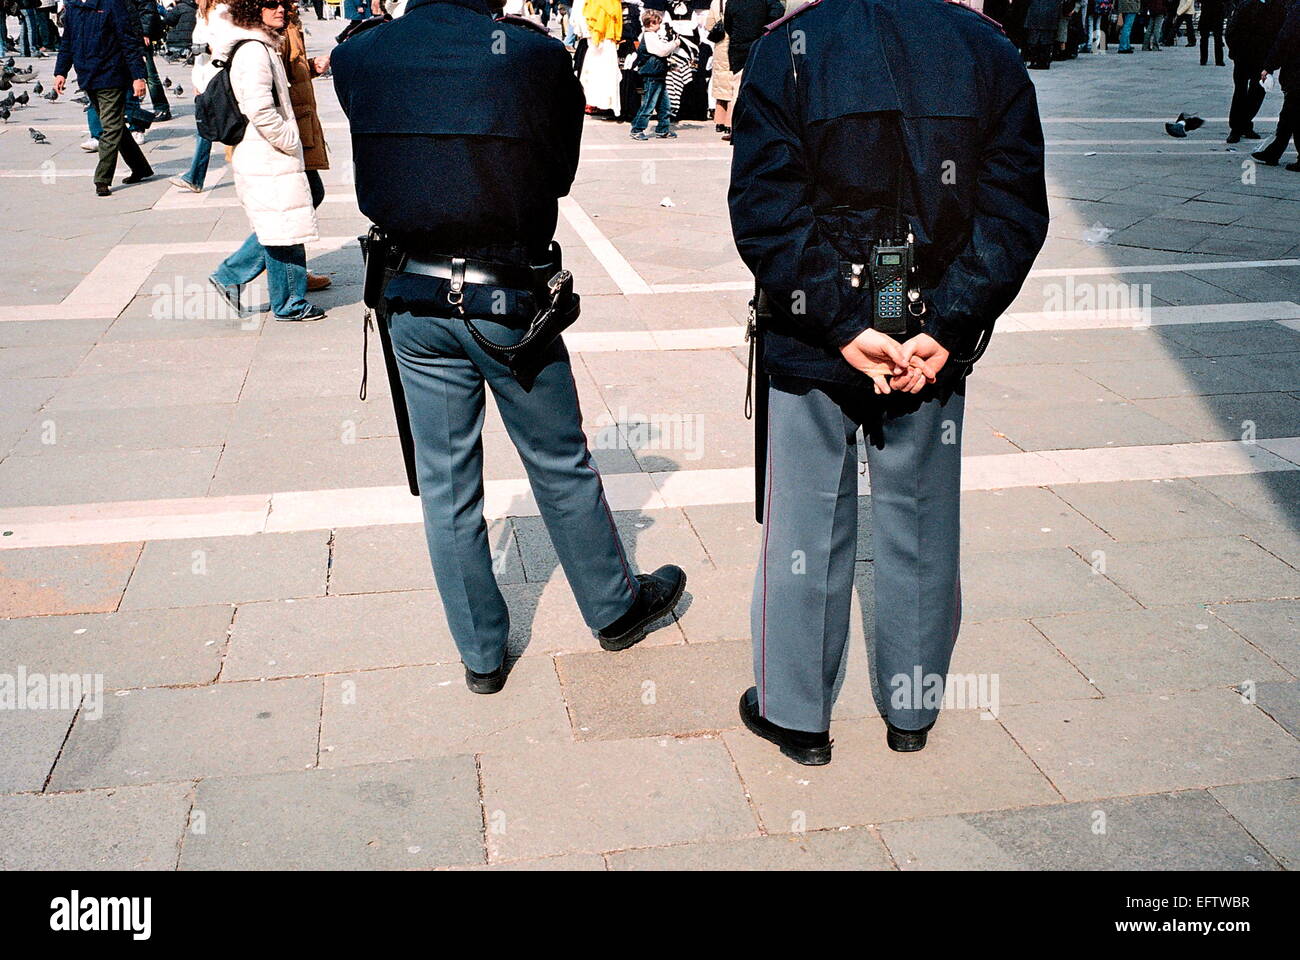 VENICE, ITALY - ITALIAN POLICE WATCHING TOURISTS ON THE PIAZZA SAN MARCO. PHOTO:JONATHAN EASTLAND REF:51011 1920A4290 Stock Photo